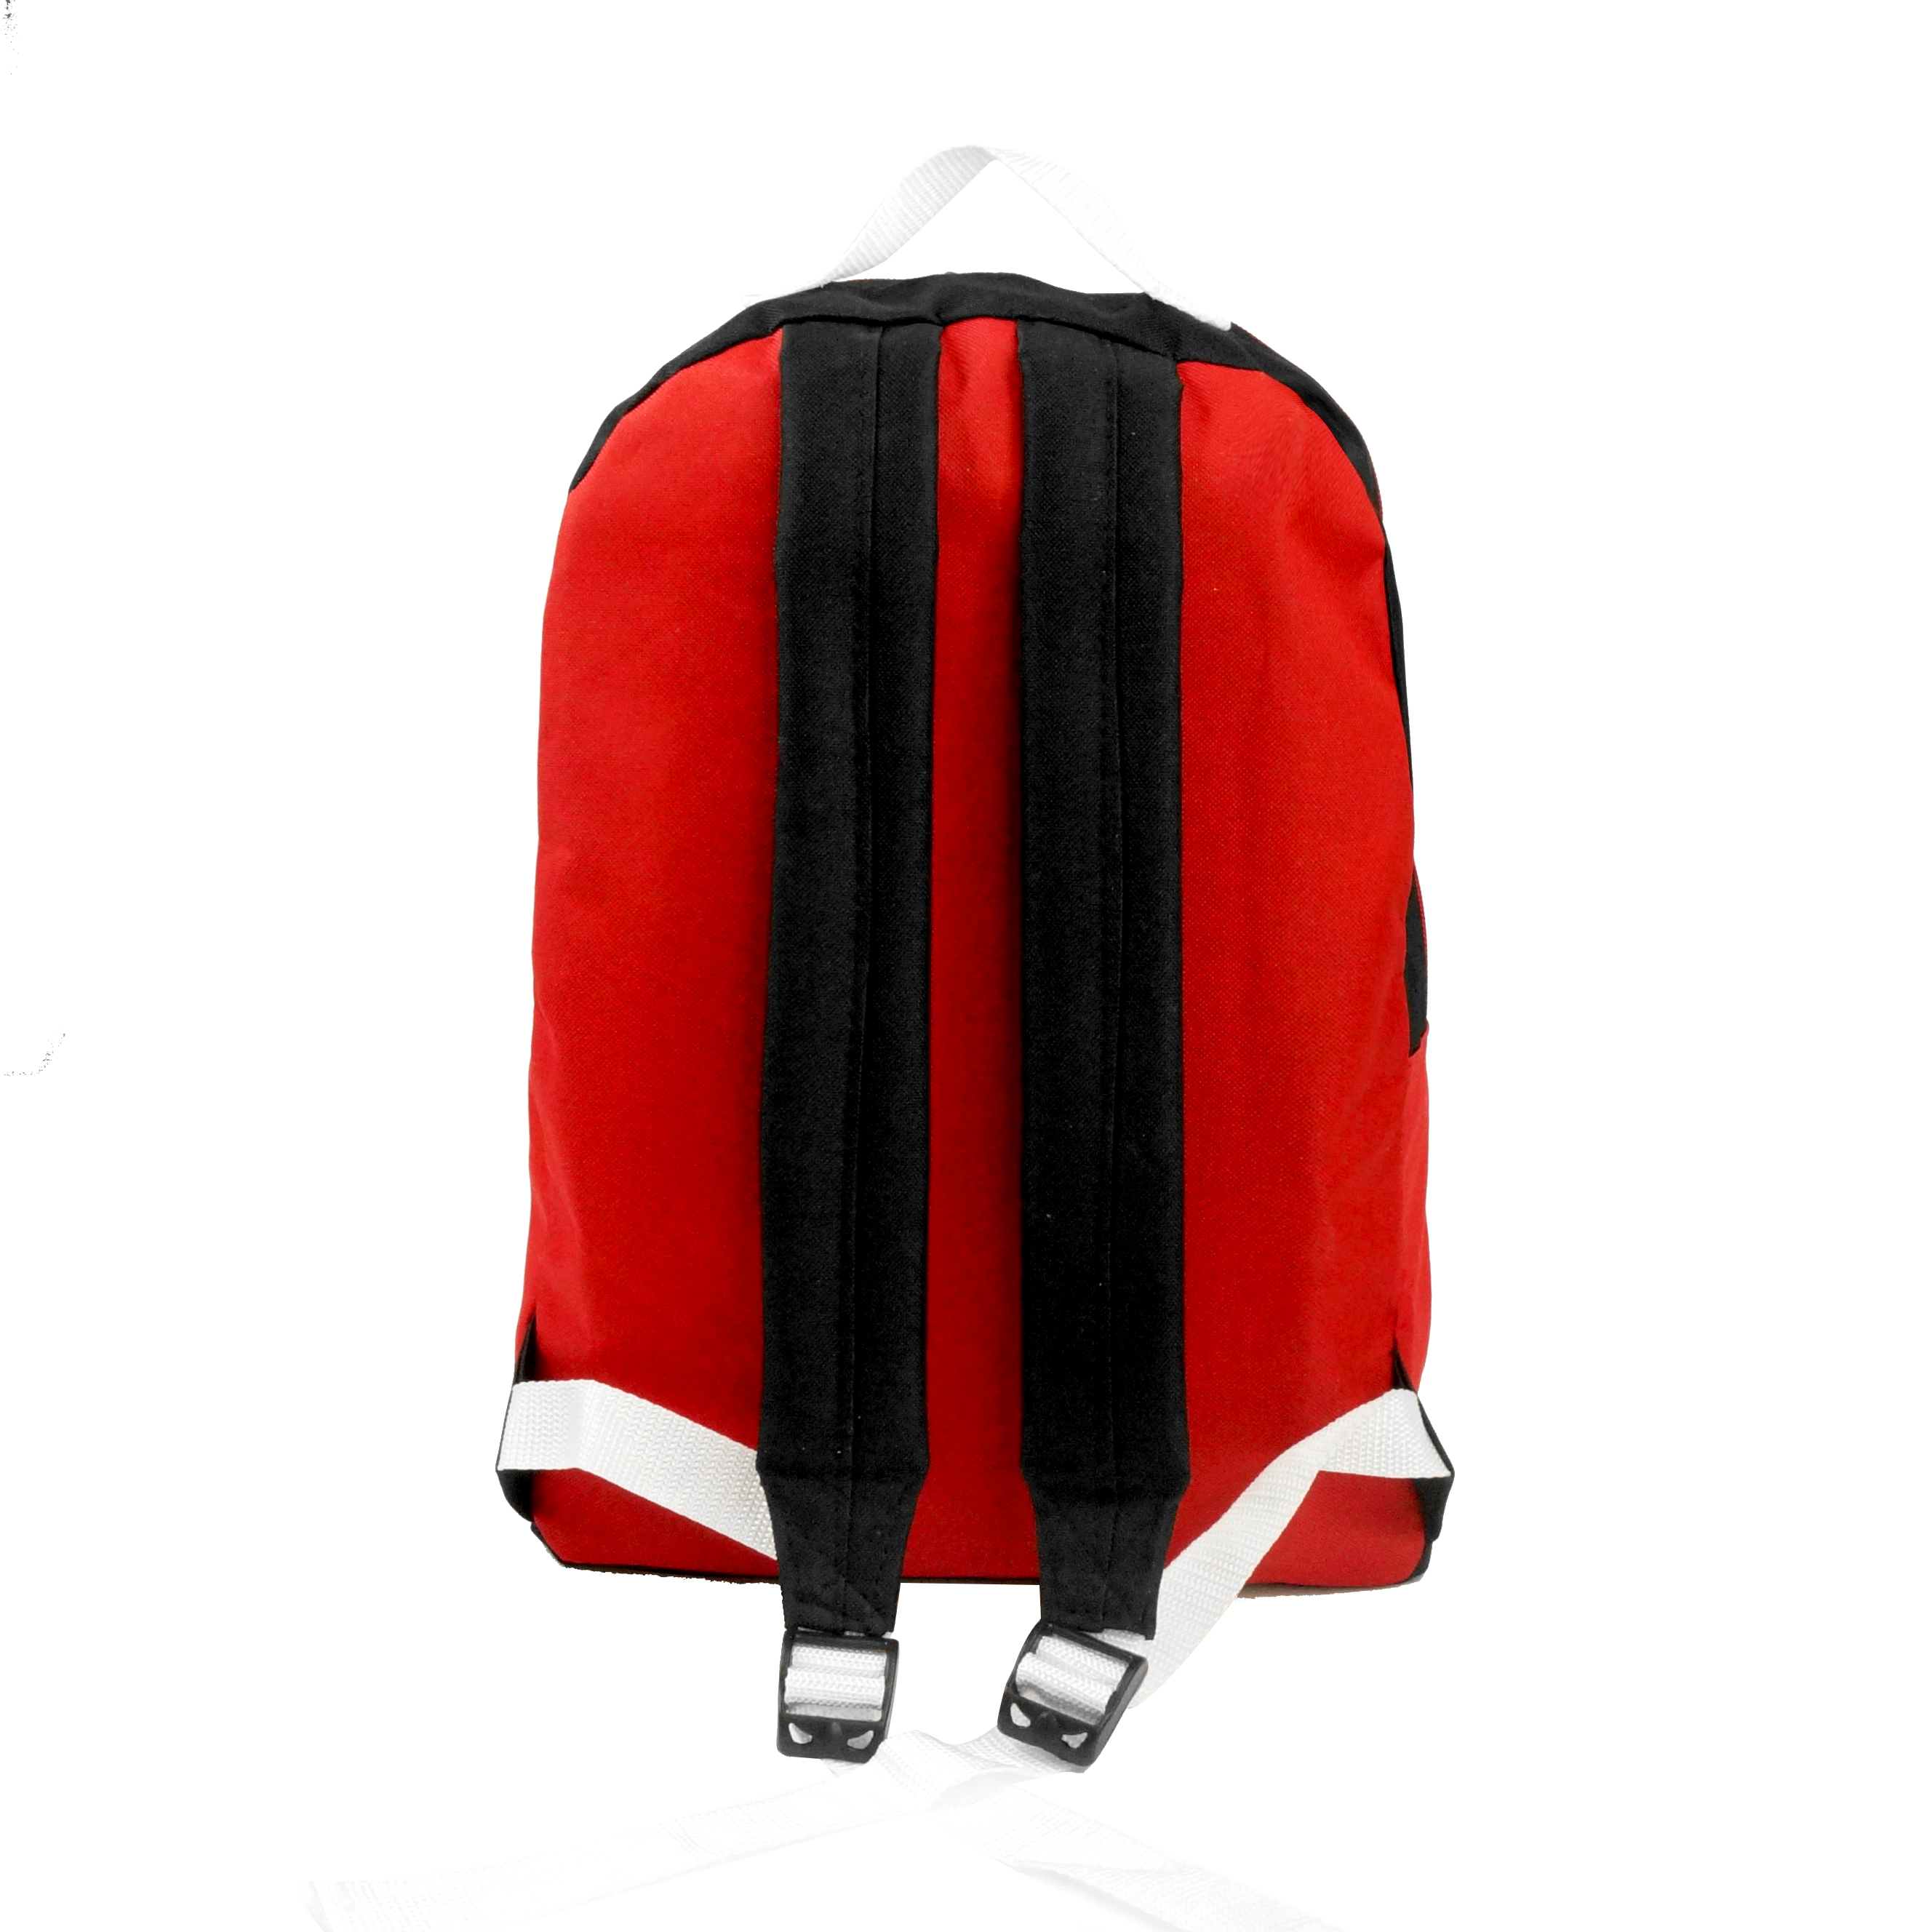 K-Cliffs 15” Lightweight School Backpack Daypack Bungee Bookbag Travel Unisex Kids- Adults Red, Polyester - image 5 of 6